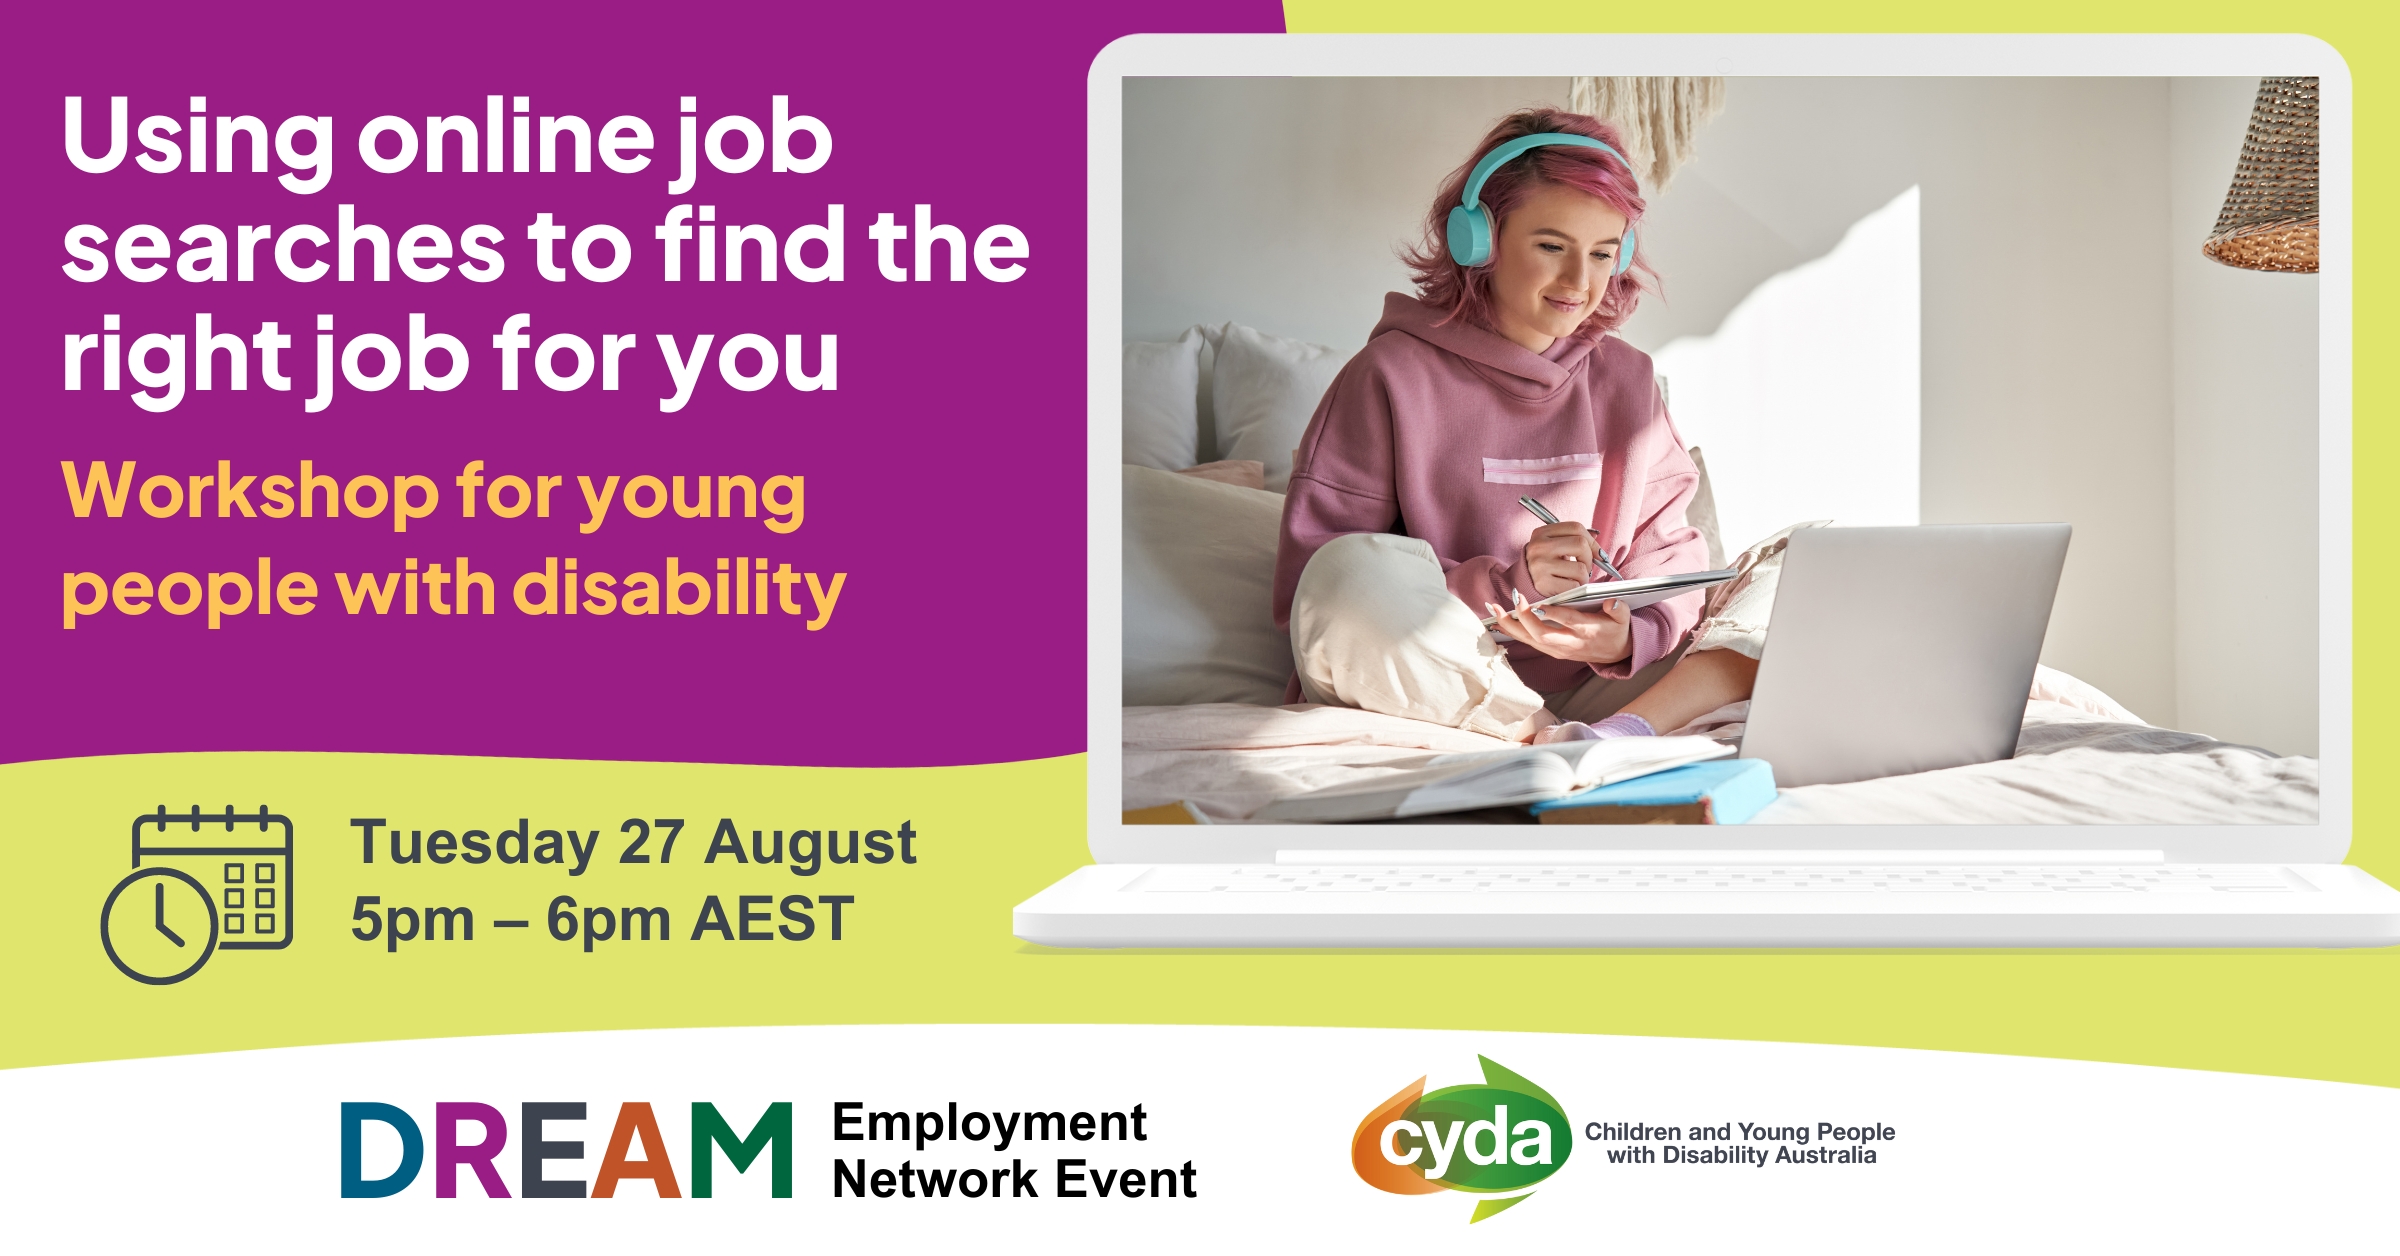 Text reads: "Using online job searches to find the right job for you. Workshop for young people with disability. Tuesday 27 August, 5pm - 6pm AEST." To the right is a white laptop featuring a young woman with pink hair wearing a pink hoodie and big blue headphone. She is sitting cross legged on a bed with a laptop in front of her, making notes with a pen and notepad. Below are the logos for the DREAM Employment Network and CYDA.